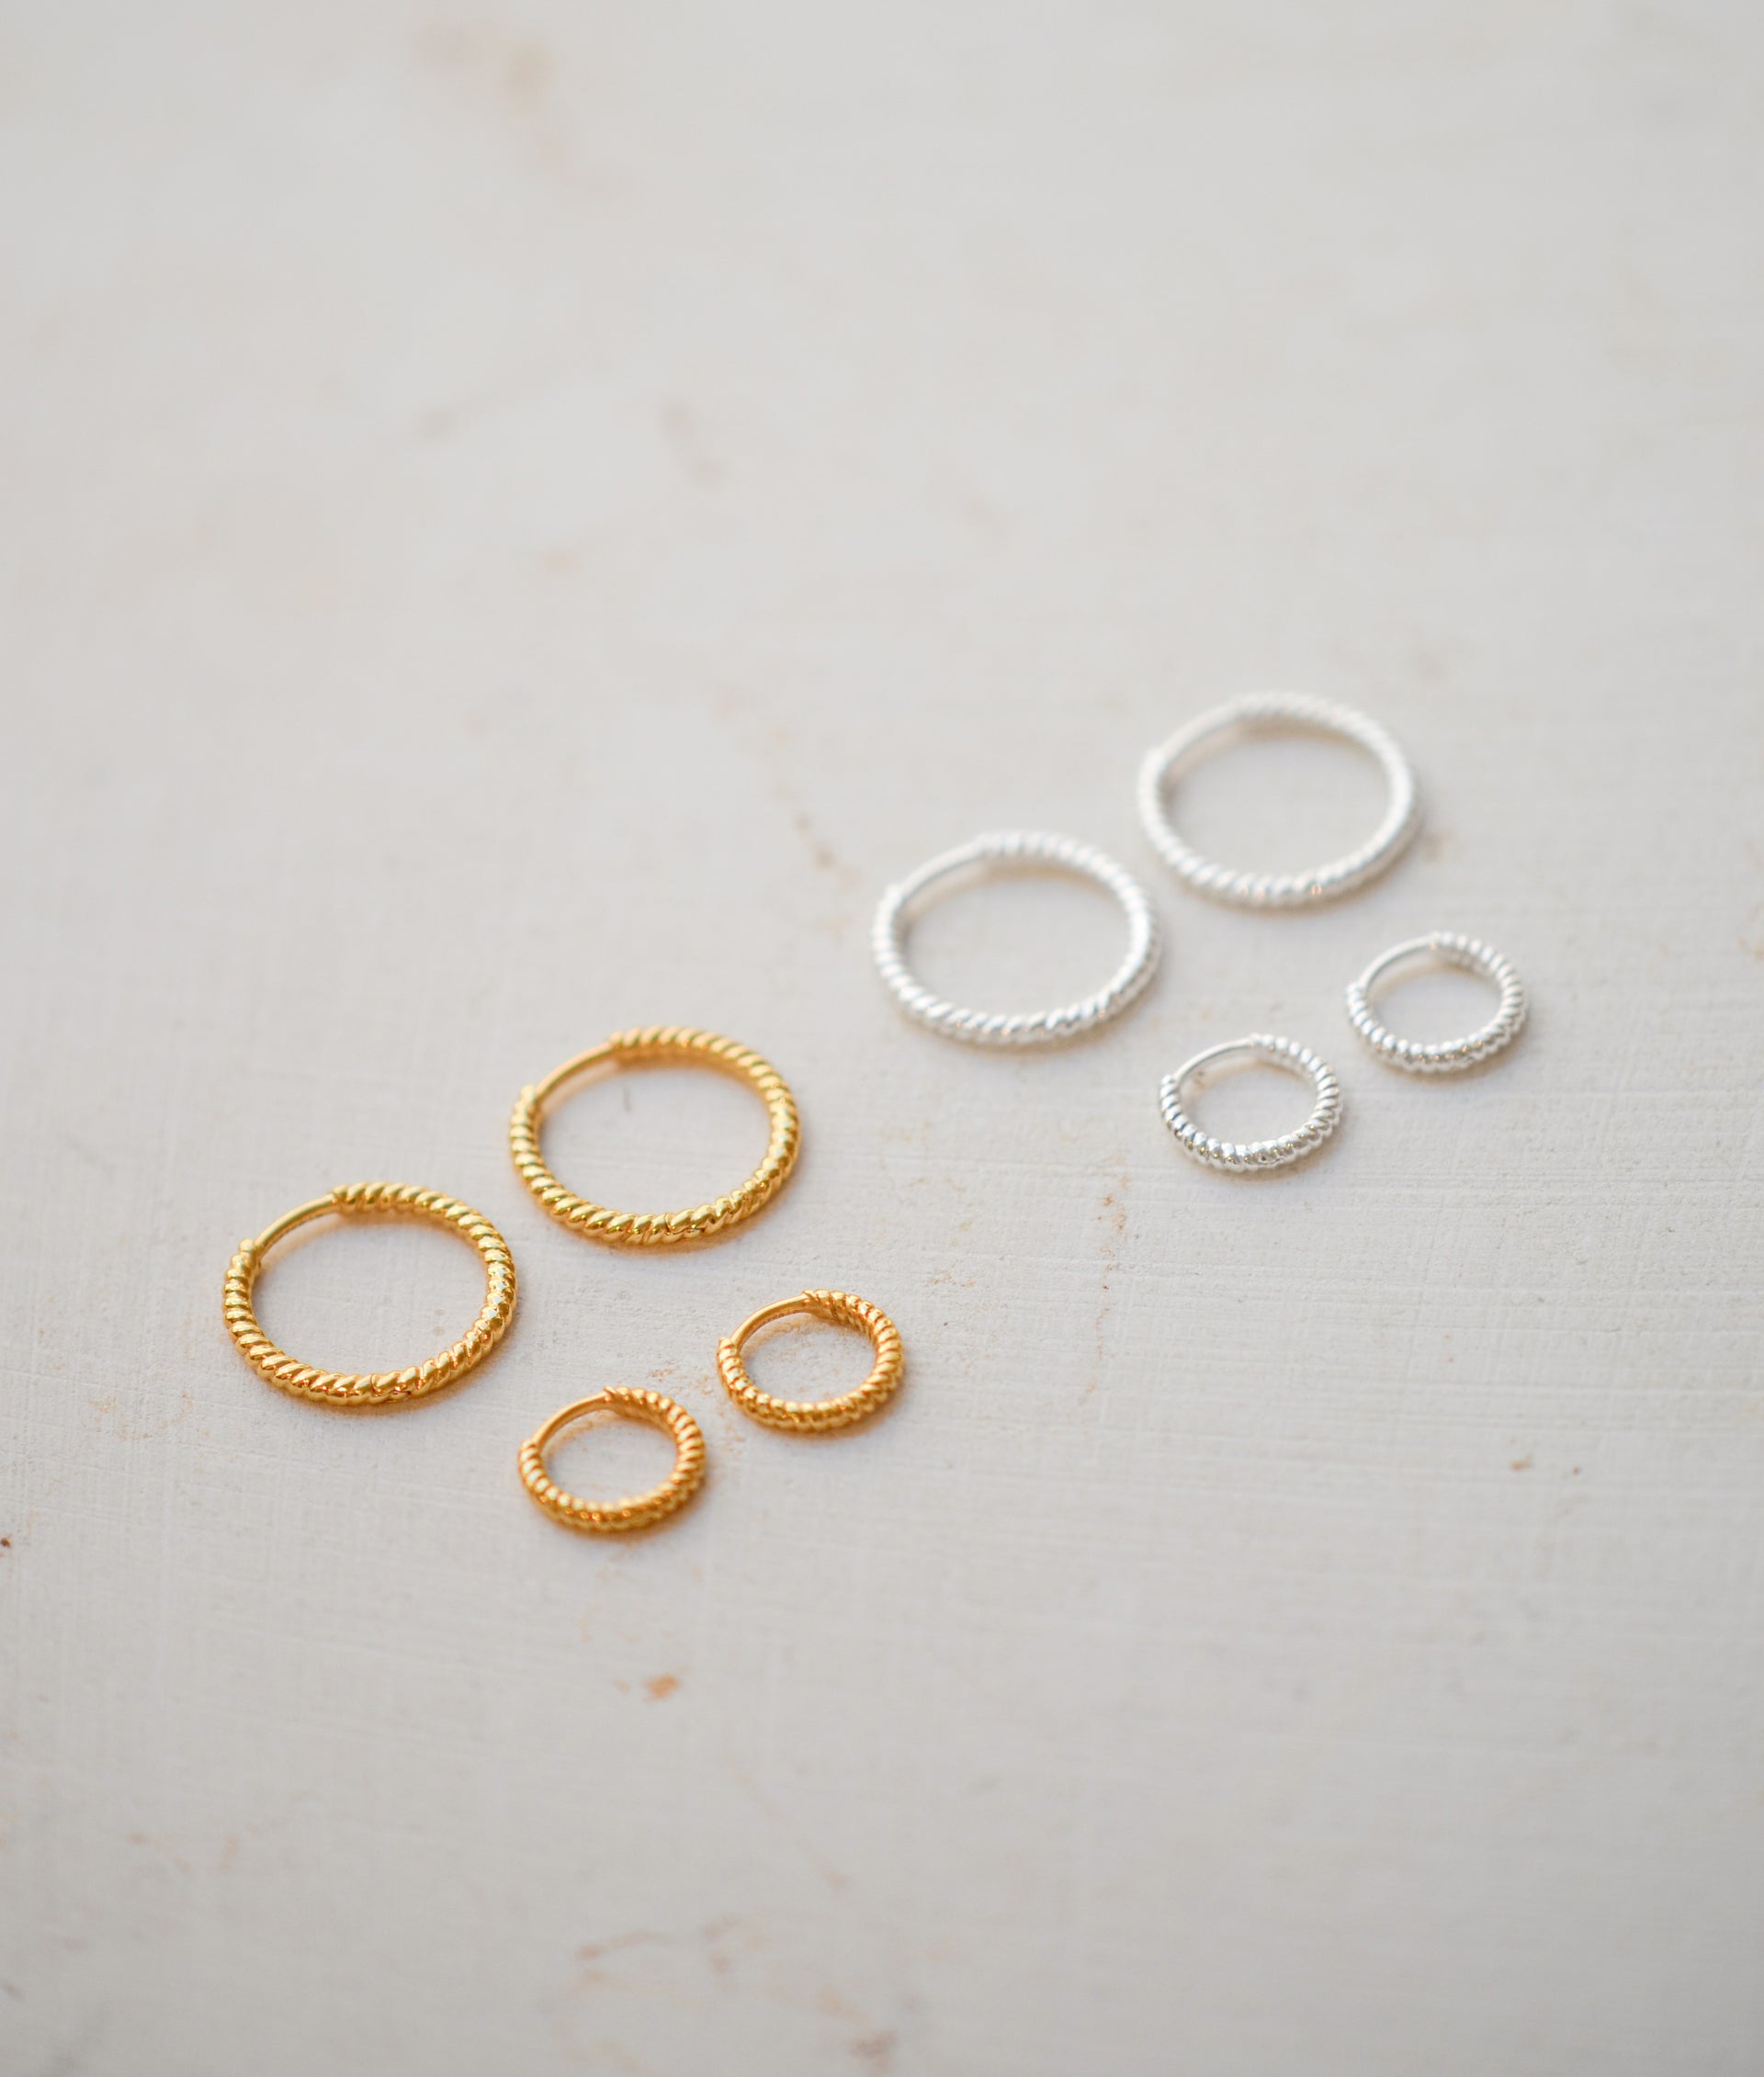 Gold hoops in two different sizes next to silver hoops in two different sizes